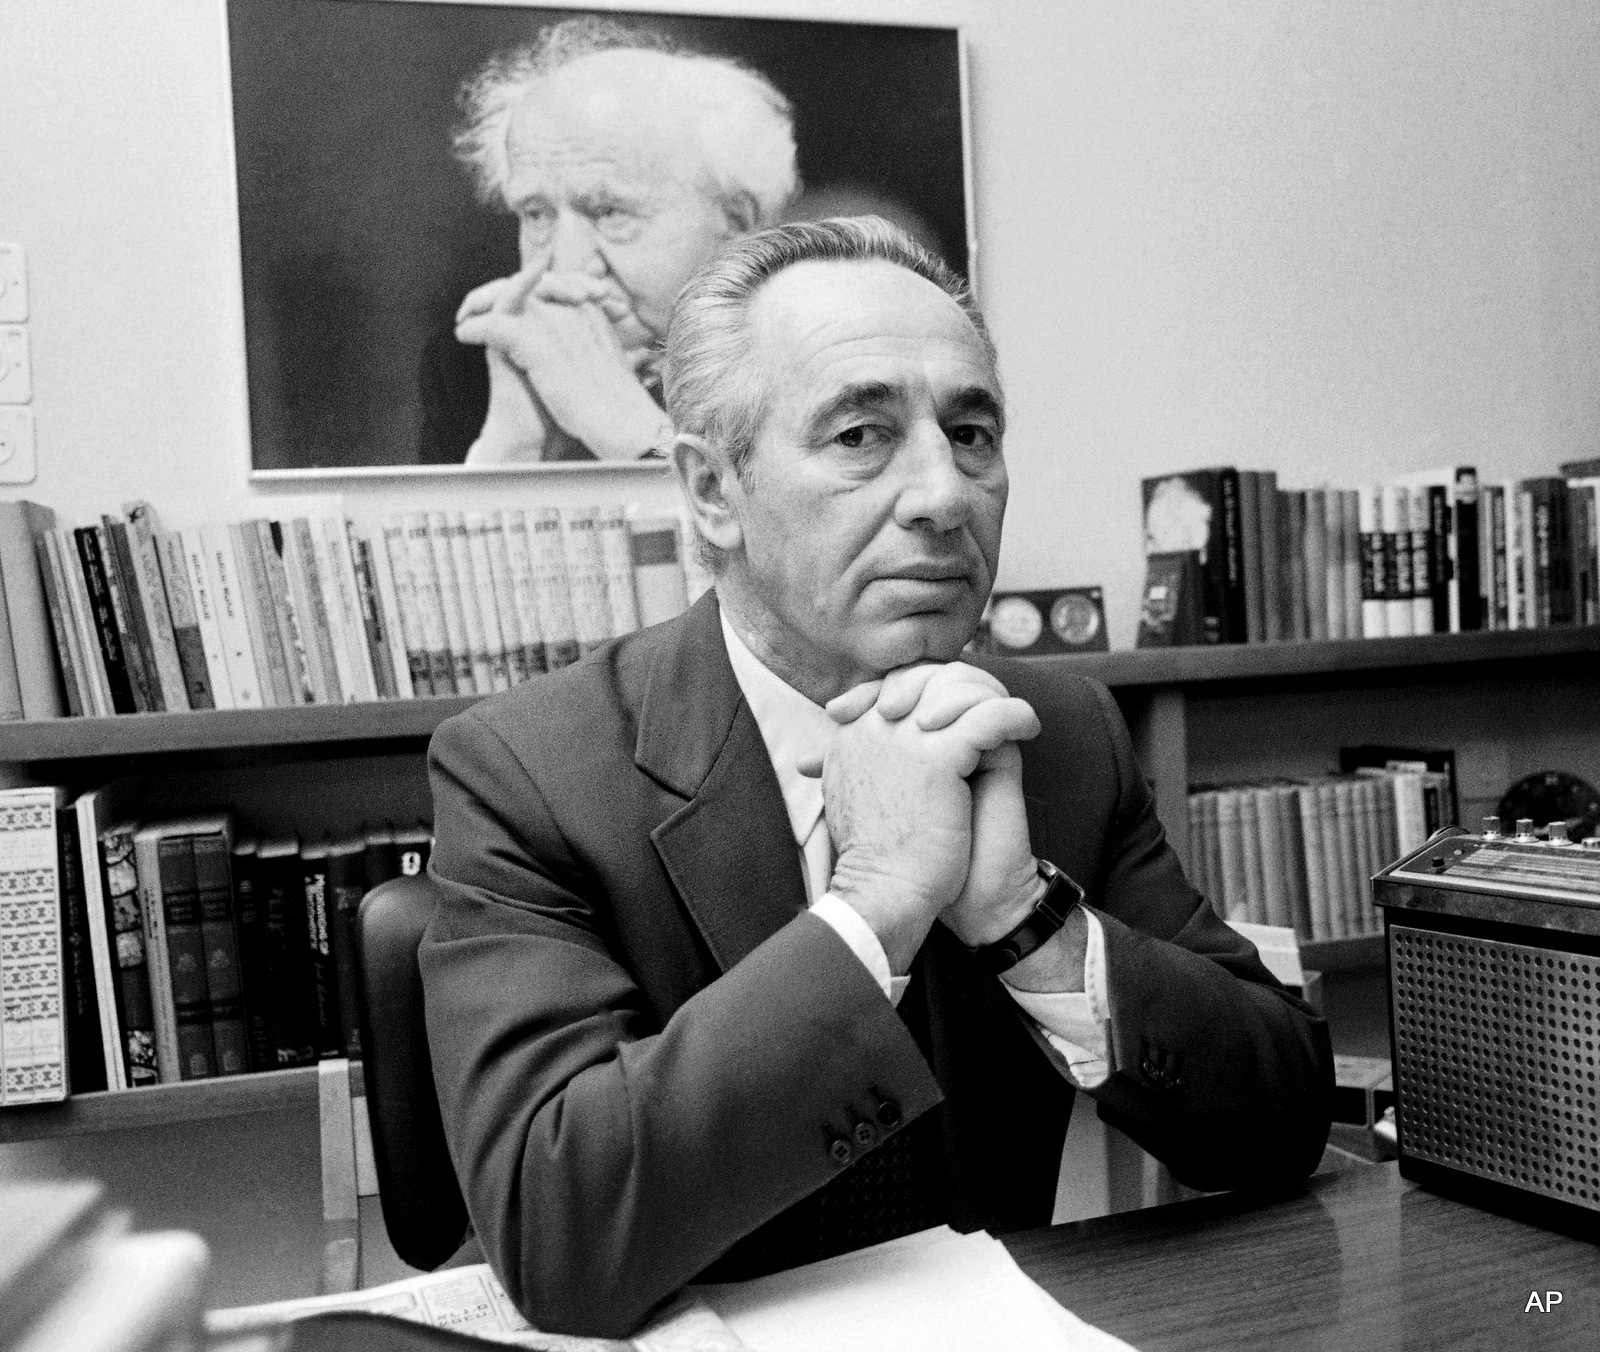  In an especially vain moment, Peres is pictured mimicking the pose of his political mentor, David Ben Gurion